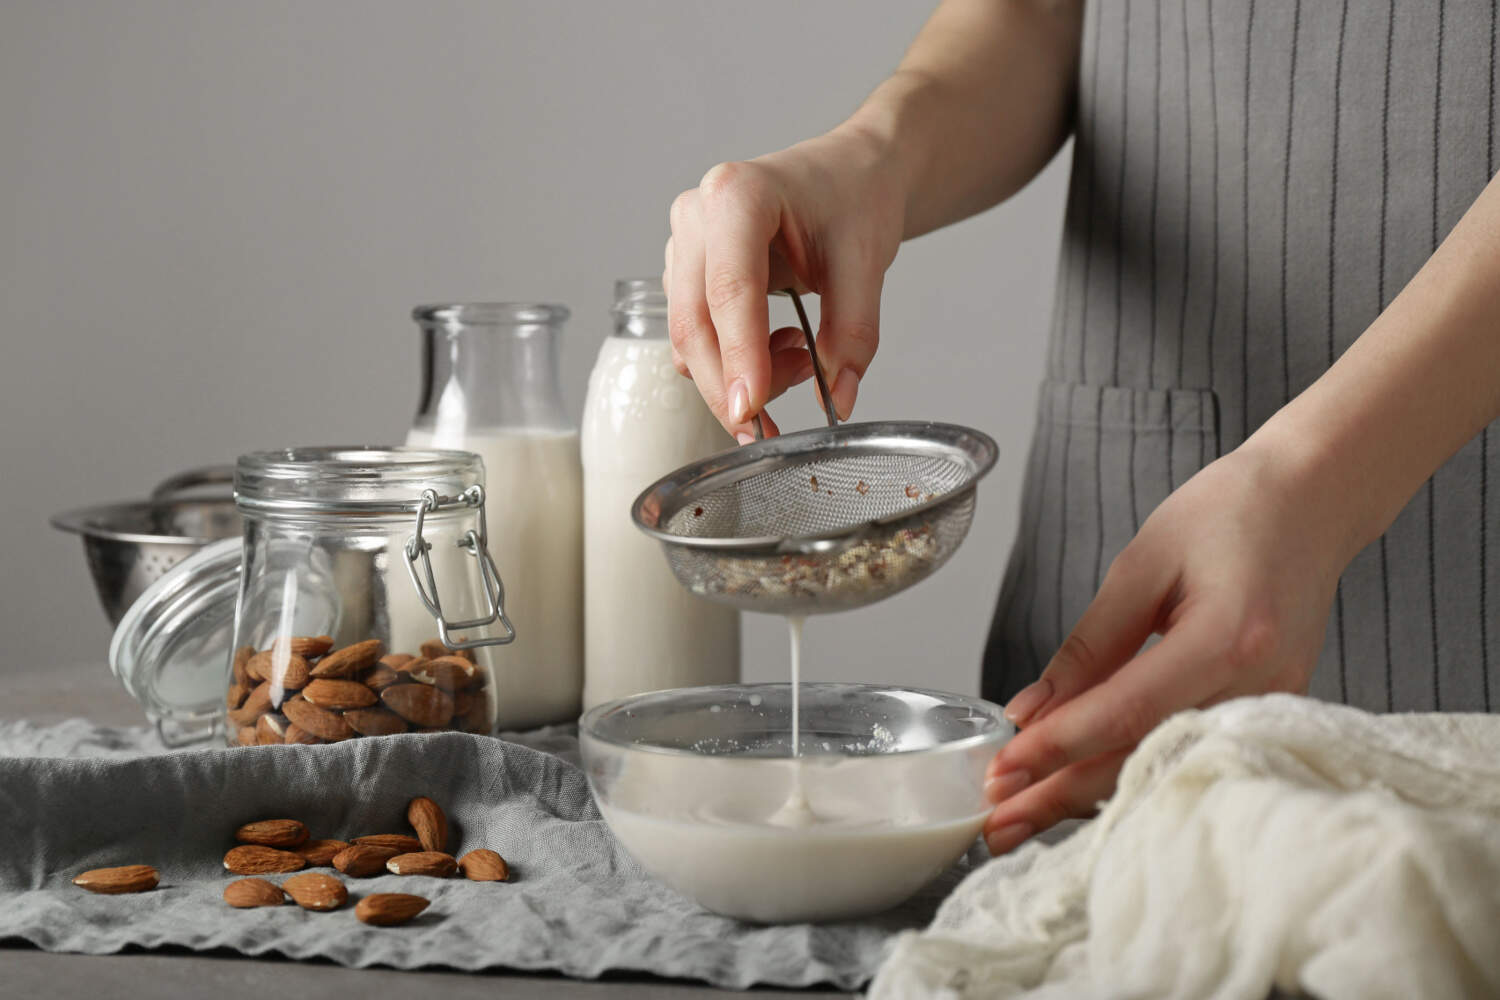 How To Prepare Almond Milk At Home